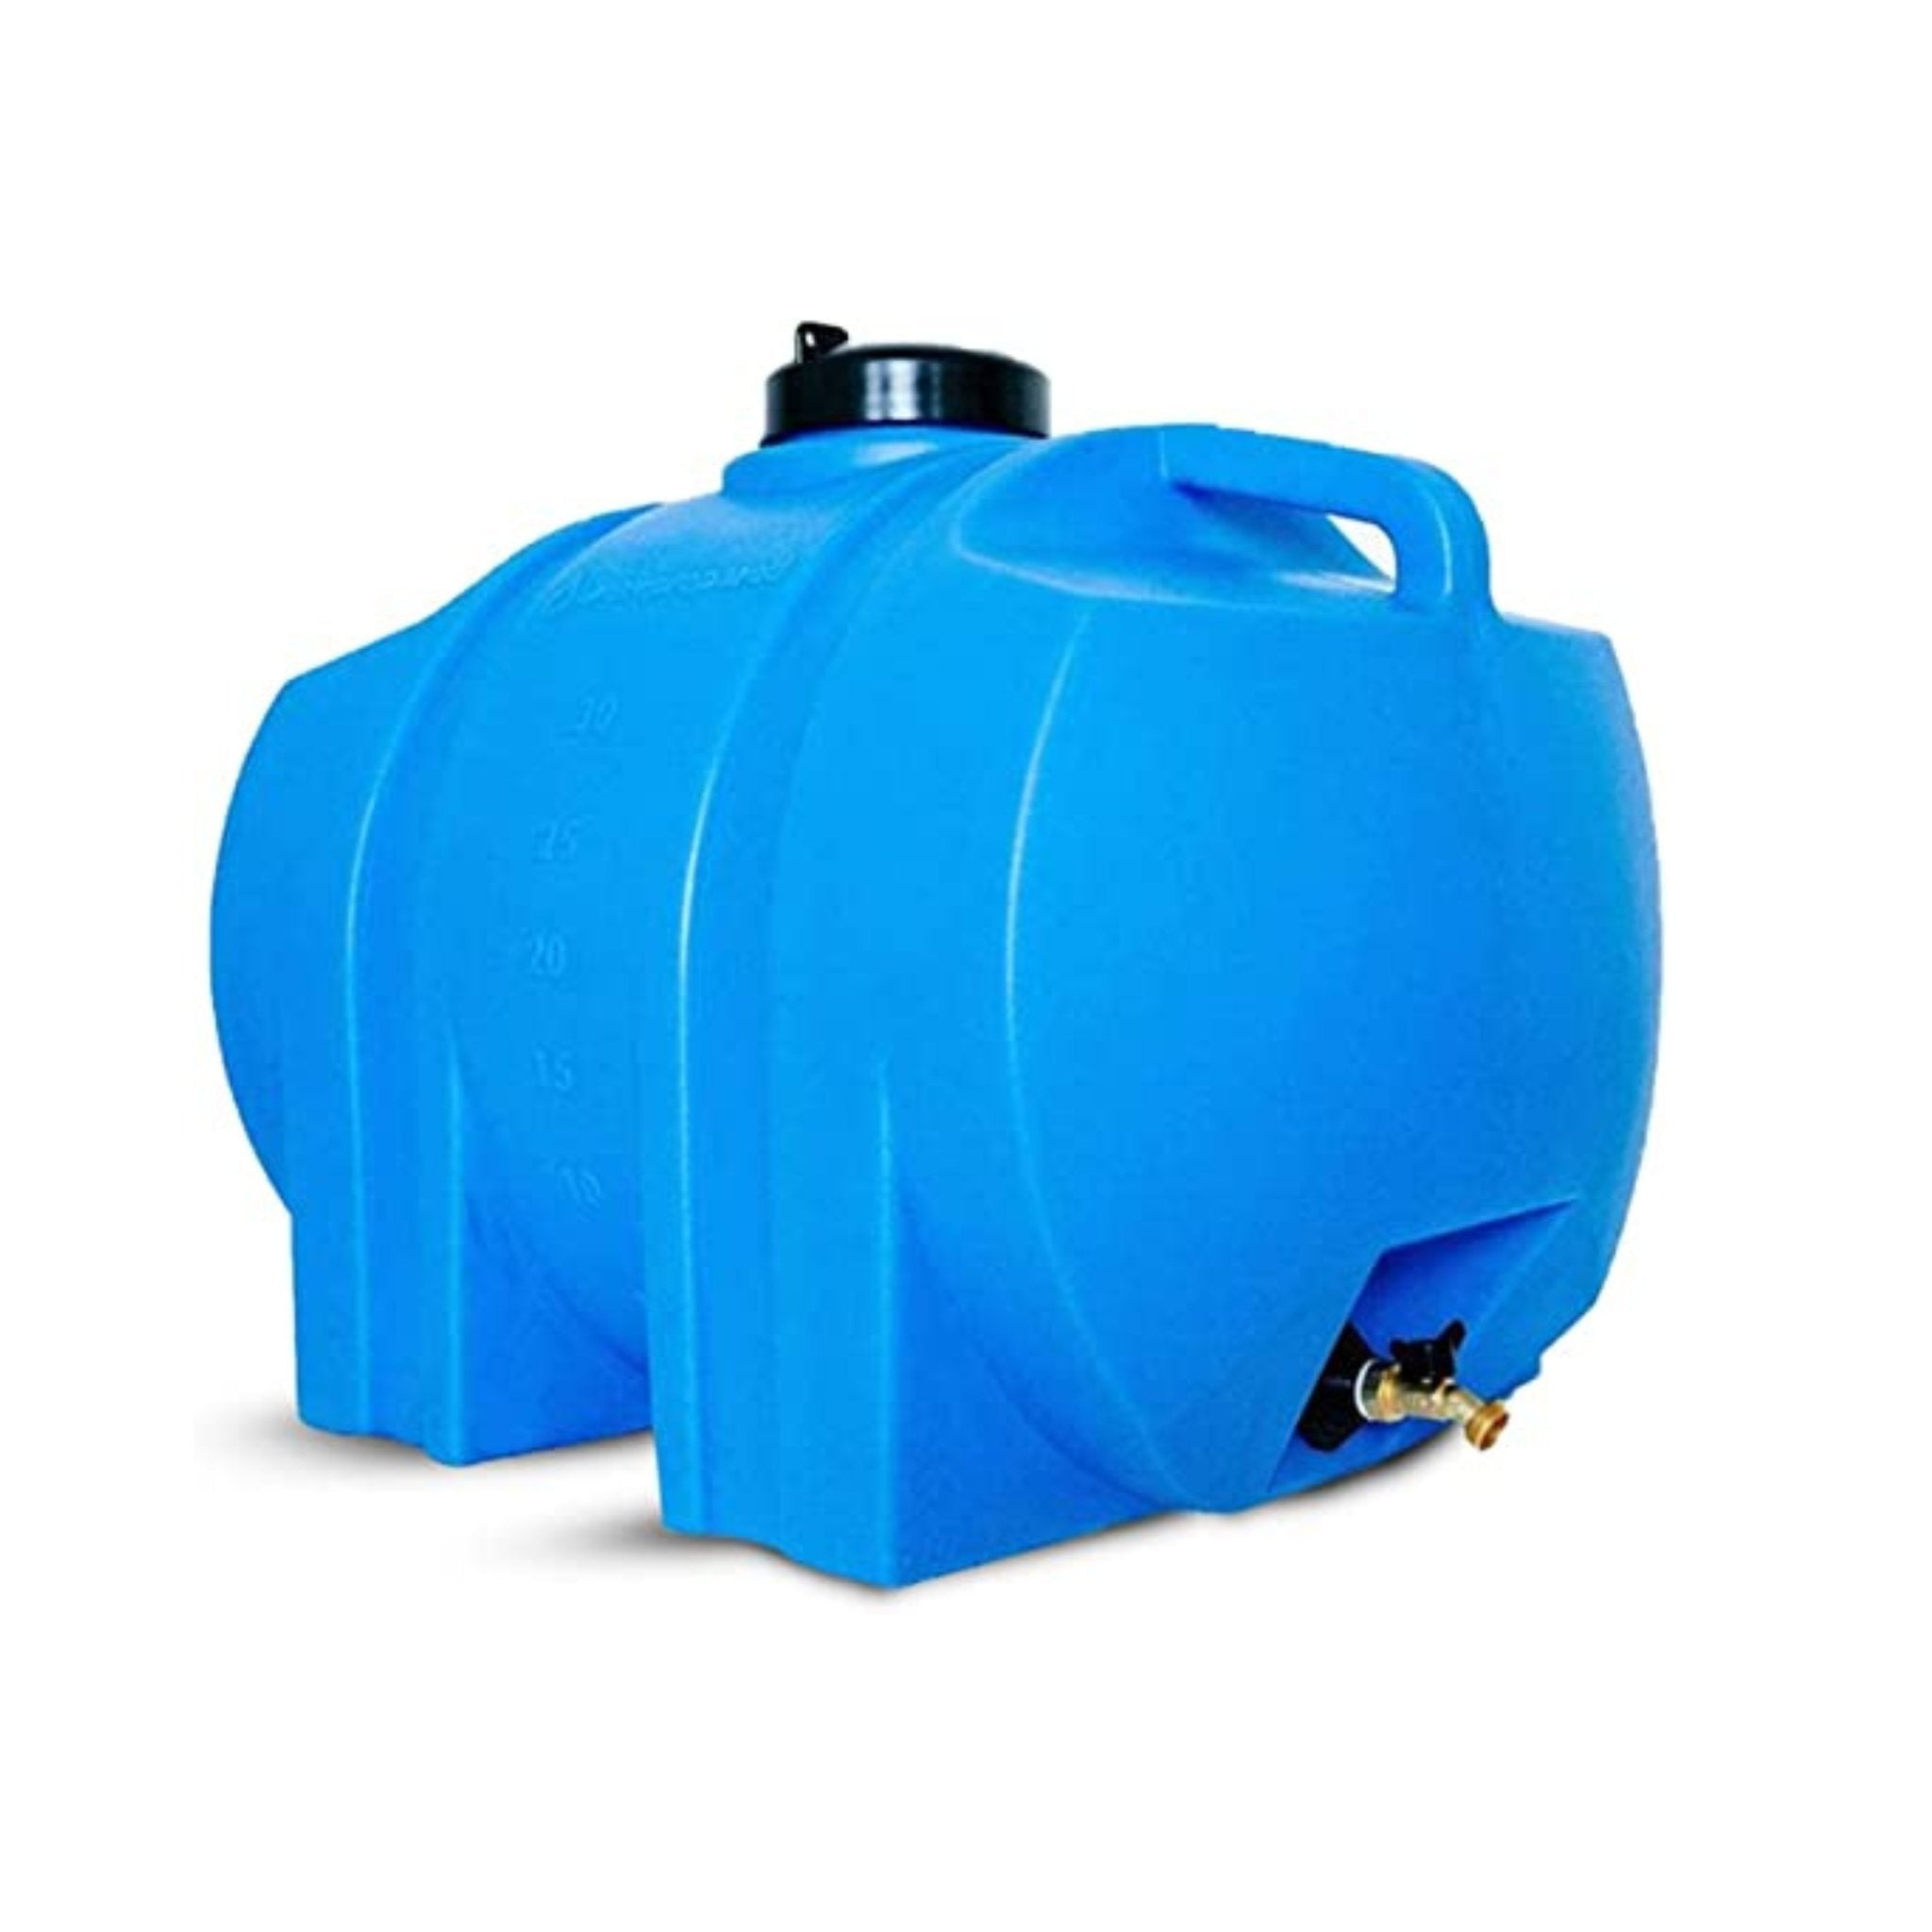 35 Gallon Water Storage Tank, Water Utility Container